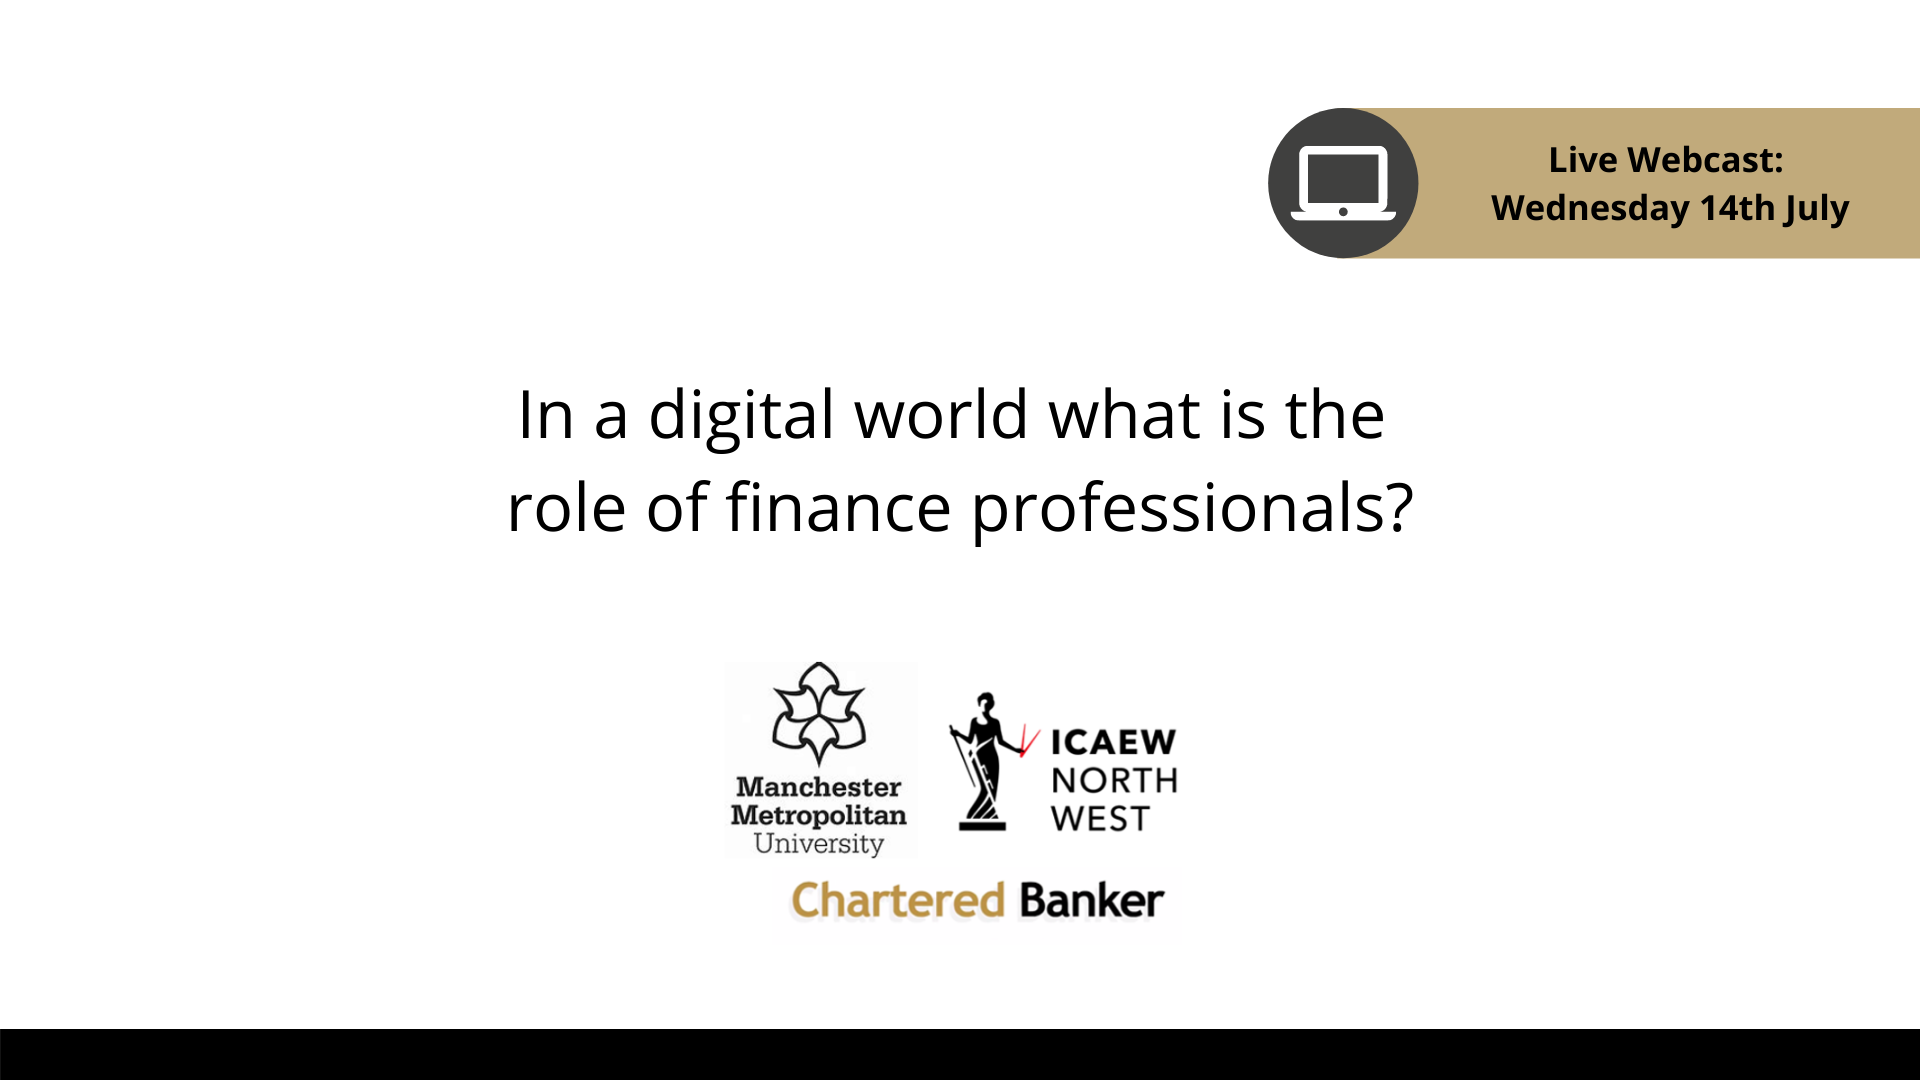 In a digital world what is the role of finance professionals?